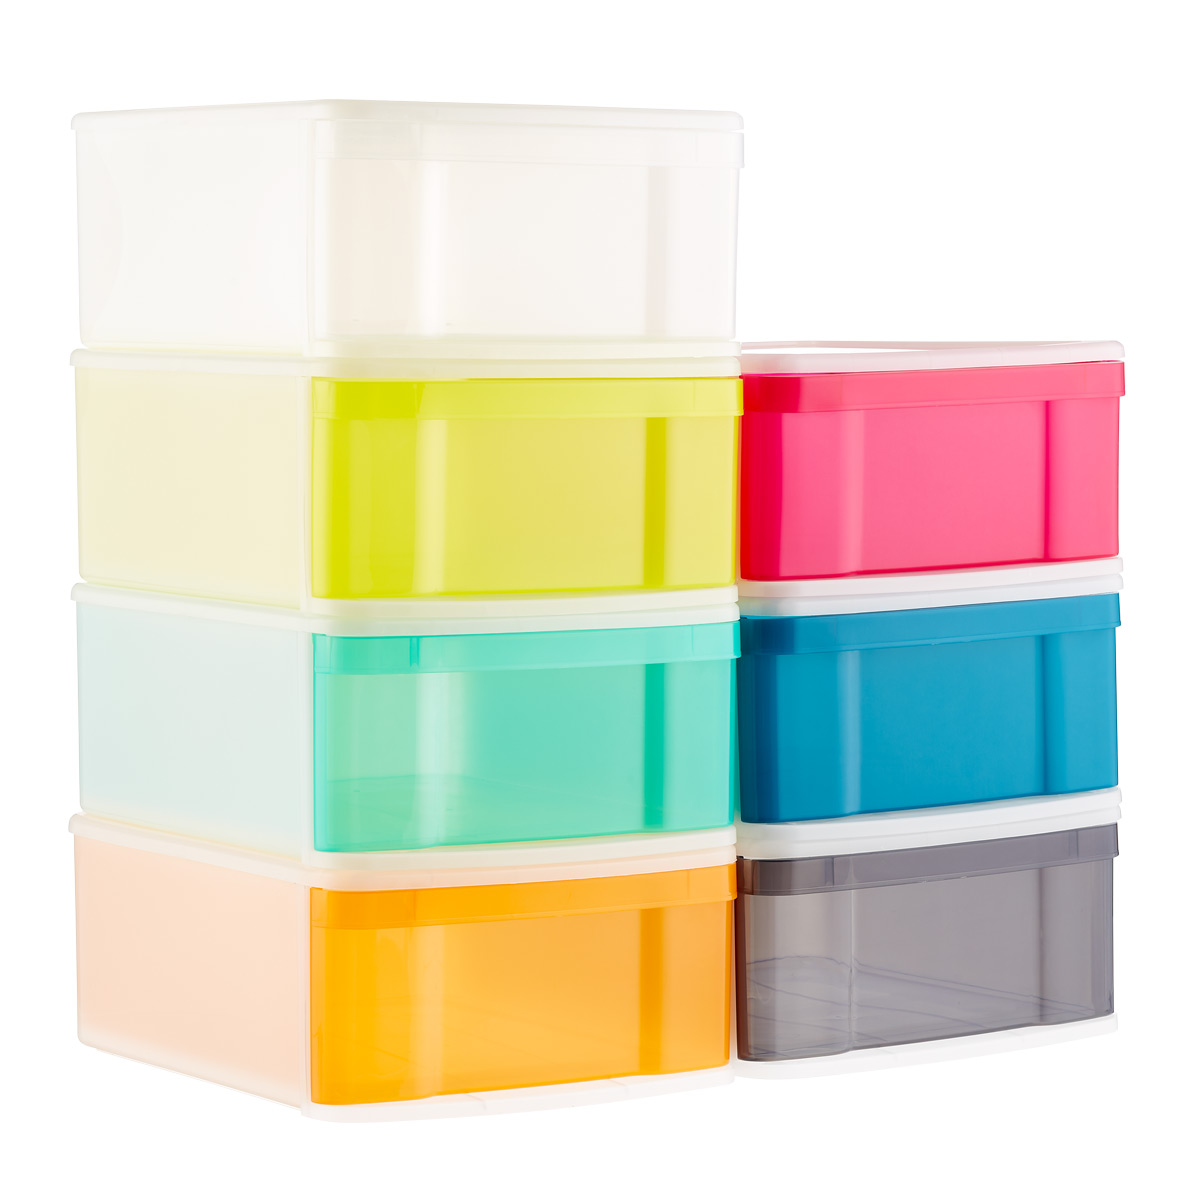 https://images.containerstore.com/catalogimages/506945/10014921g-tint-stacking-drawer-large.jpg